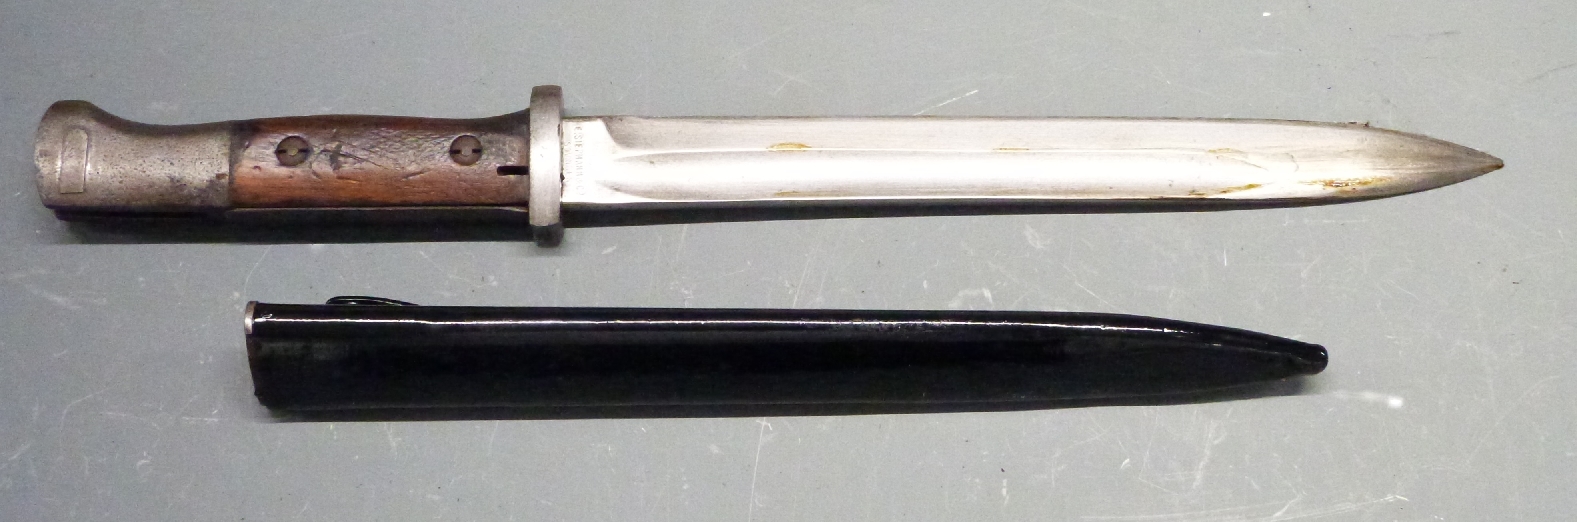 German 84/98 pattern bayonet with flashguard, E Siepmann & Co Solingen to ricasso, 25cm fullered - Image 2 of 3